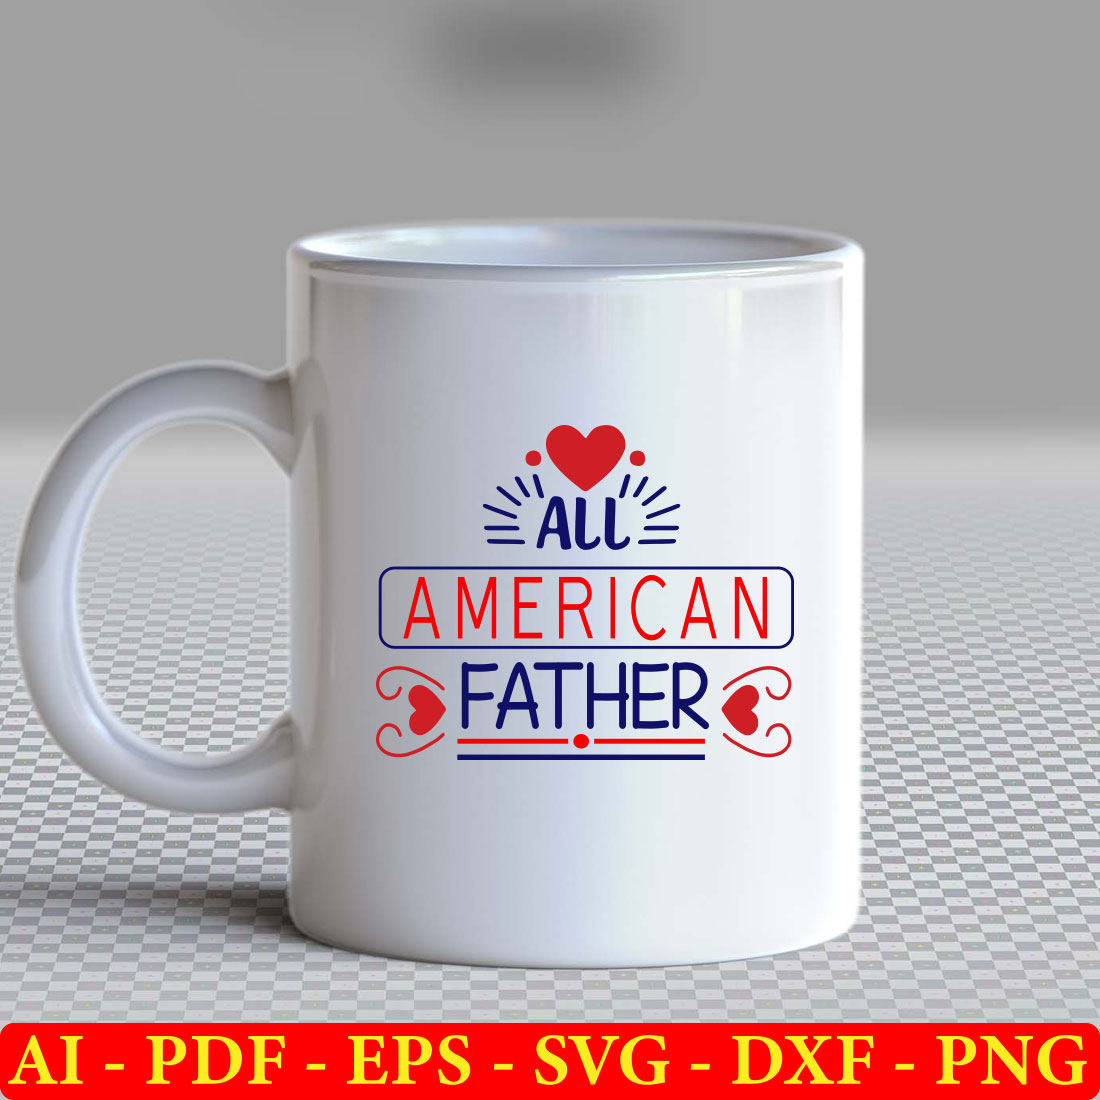 White coffee mug with the words all american father on it.